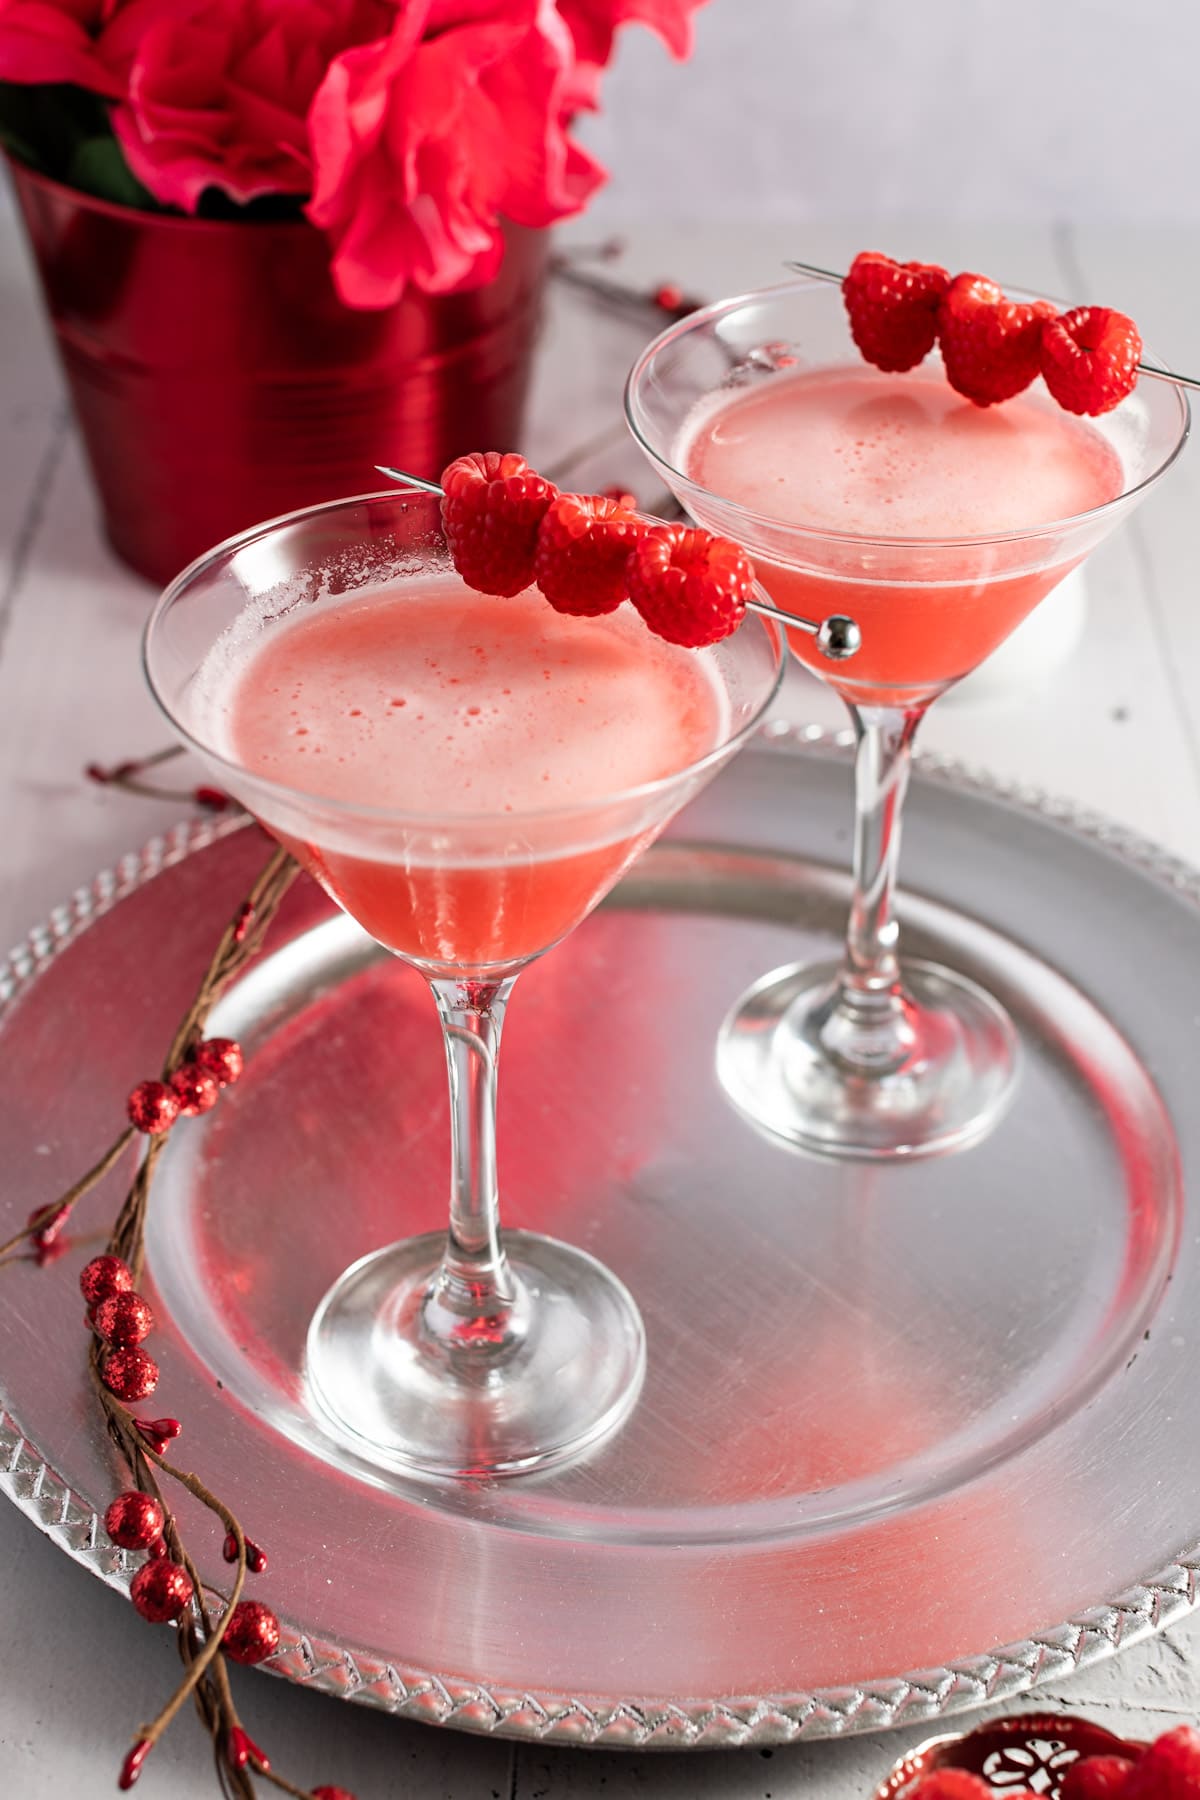 Two martinis on a silver plate, garnished with fresh raspberries, with a red bucket with red roses in the background.